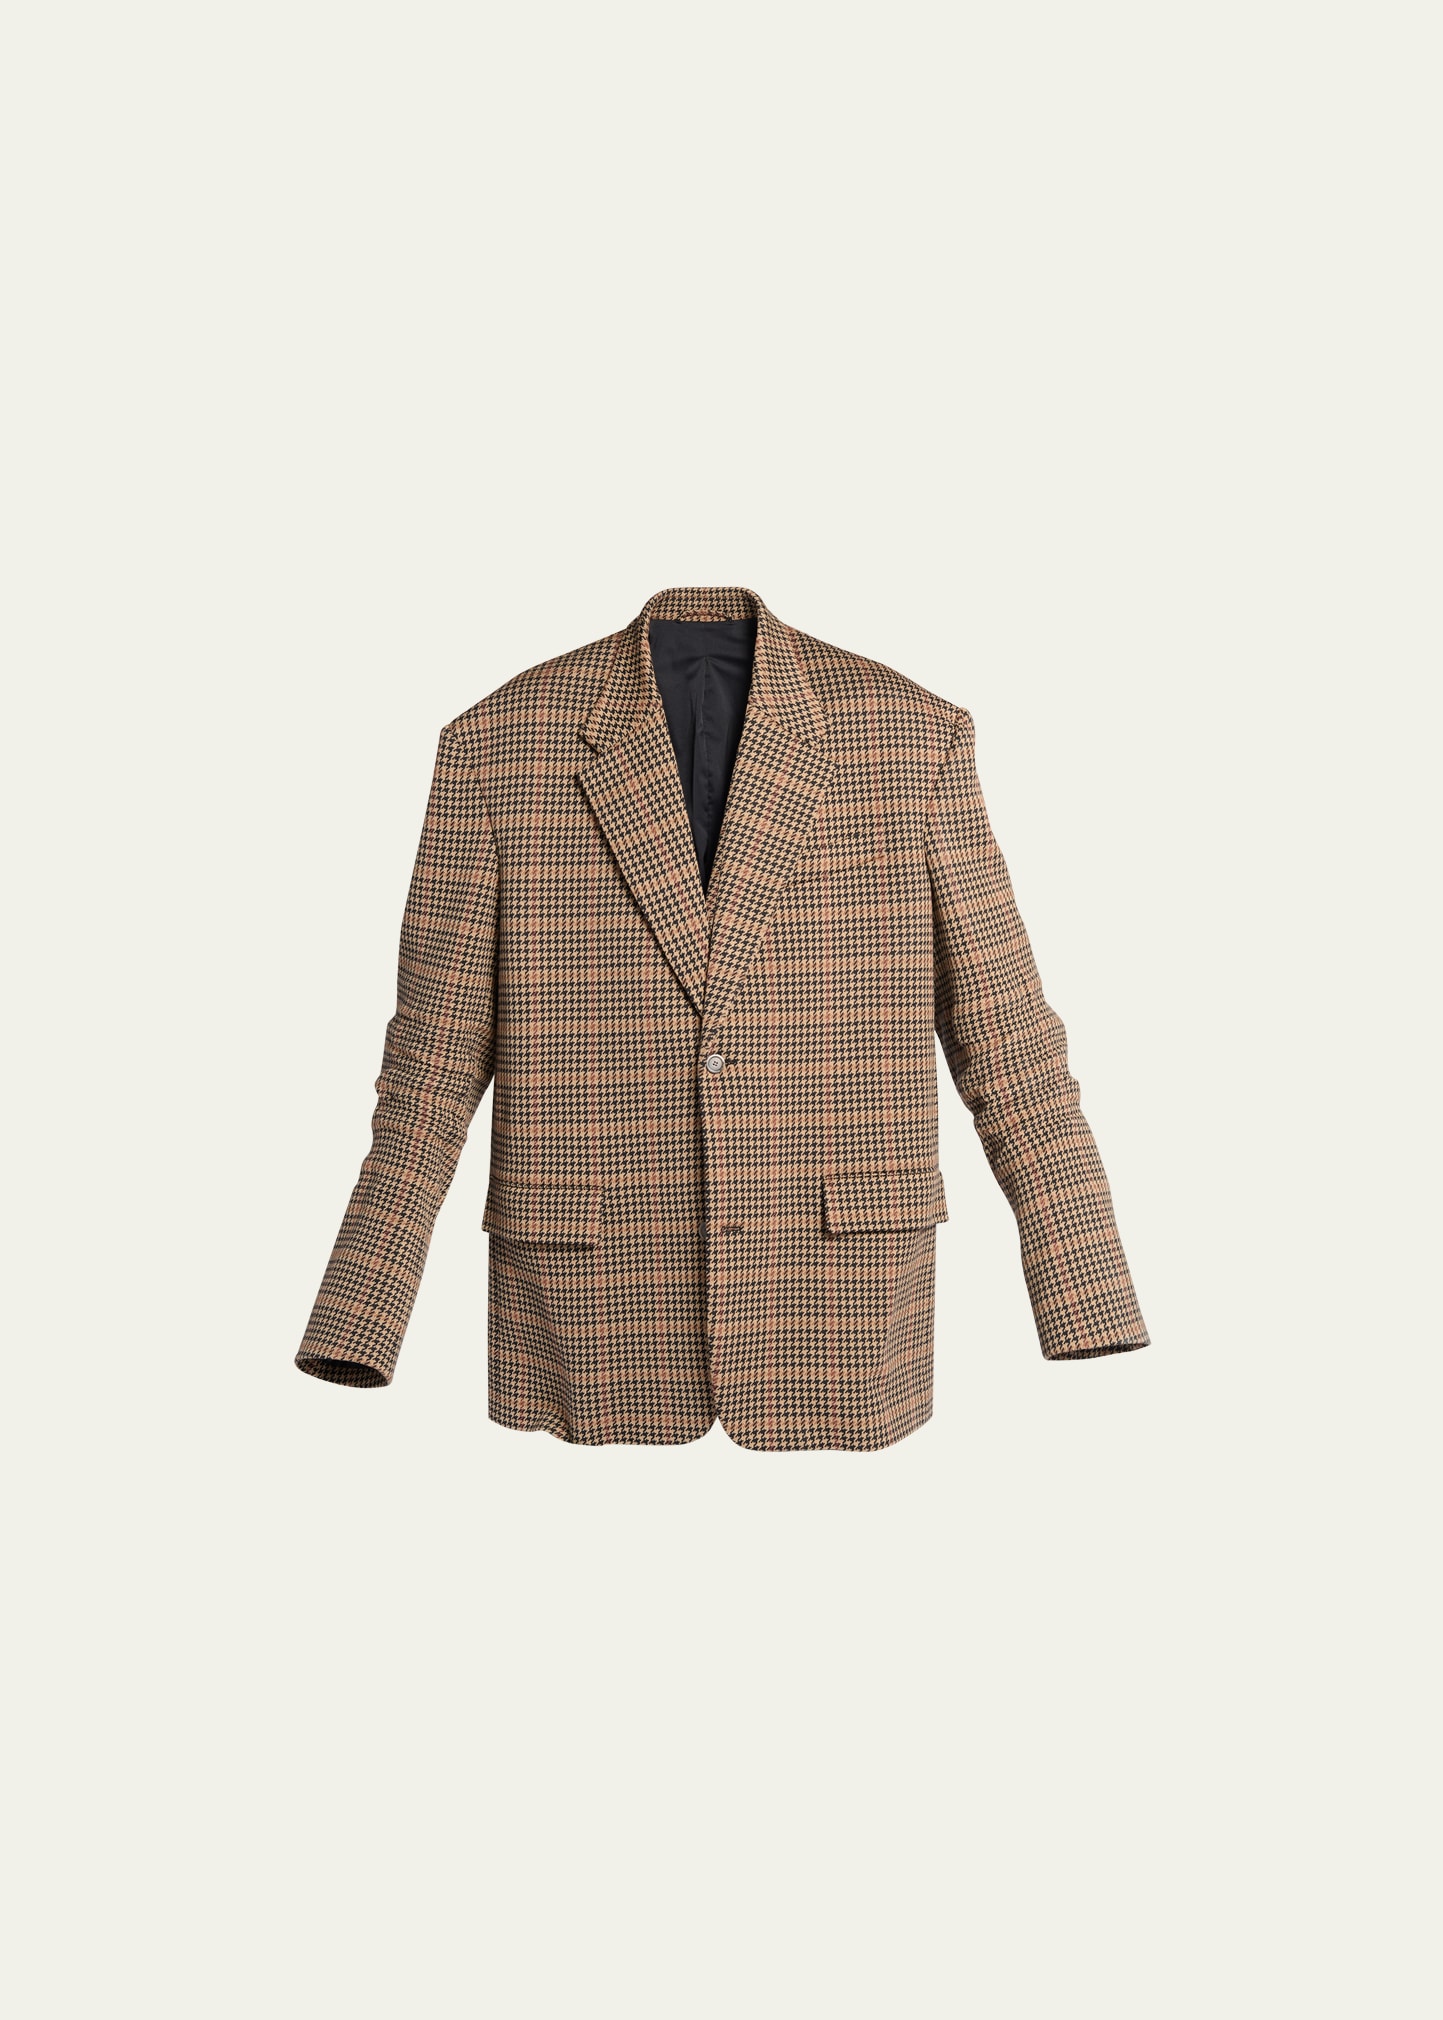 Men's Houndstooth Knit Single-Breasted Jacket